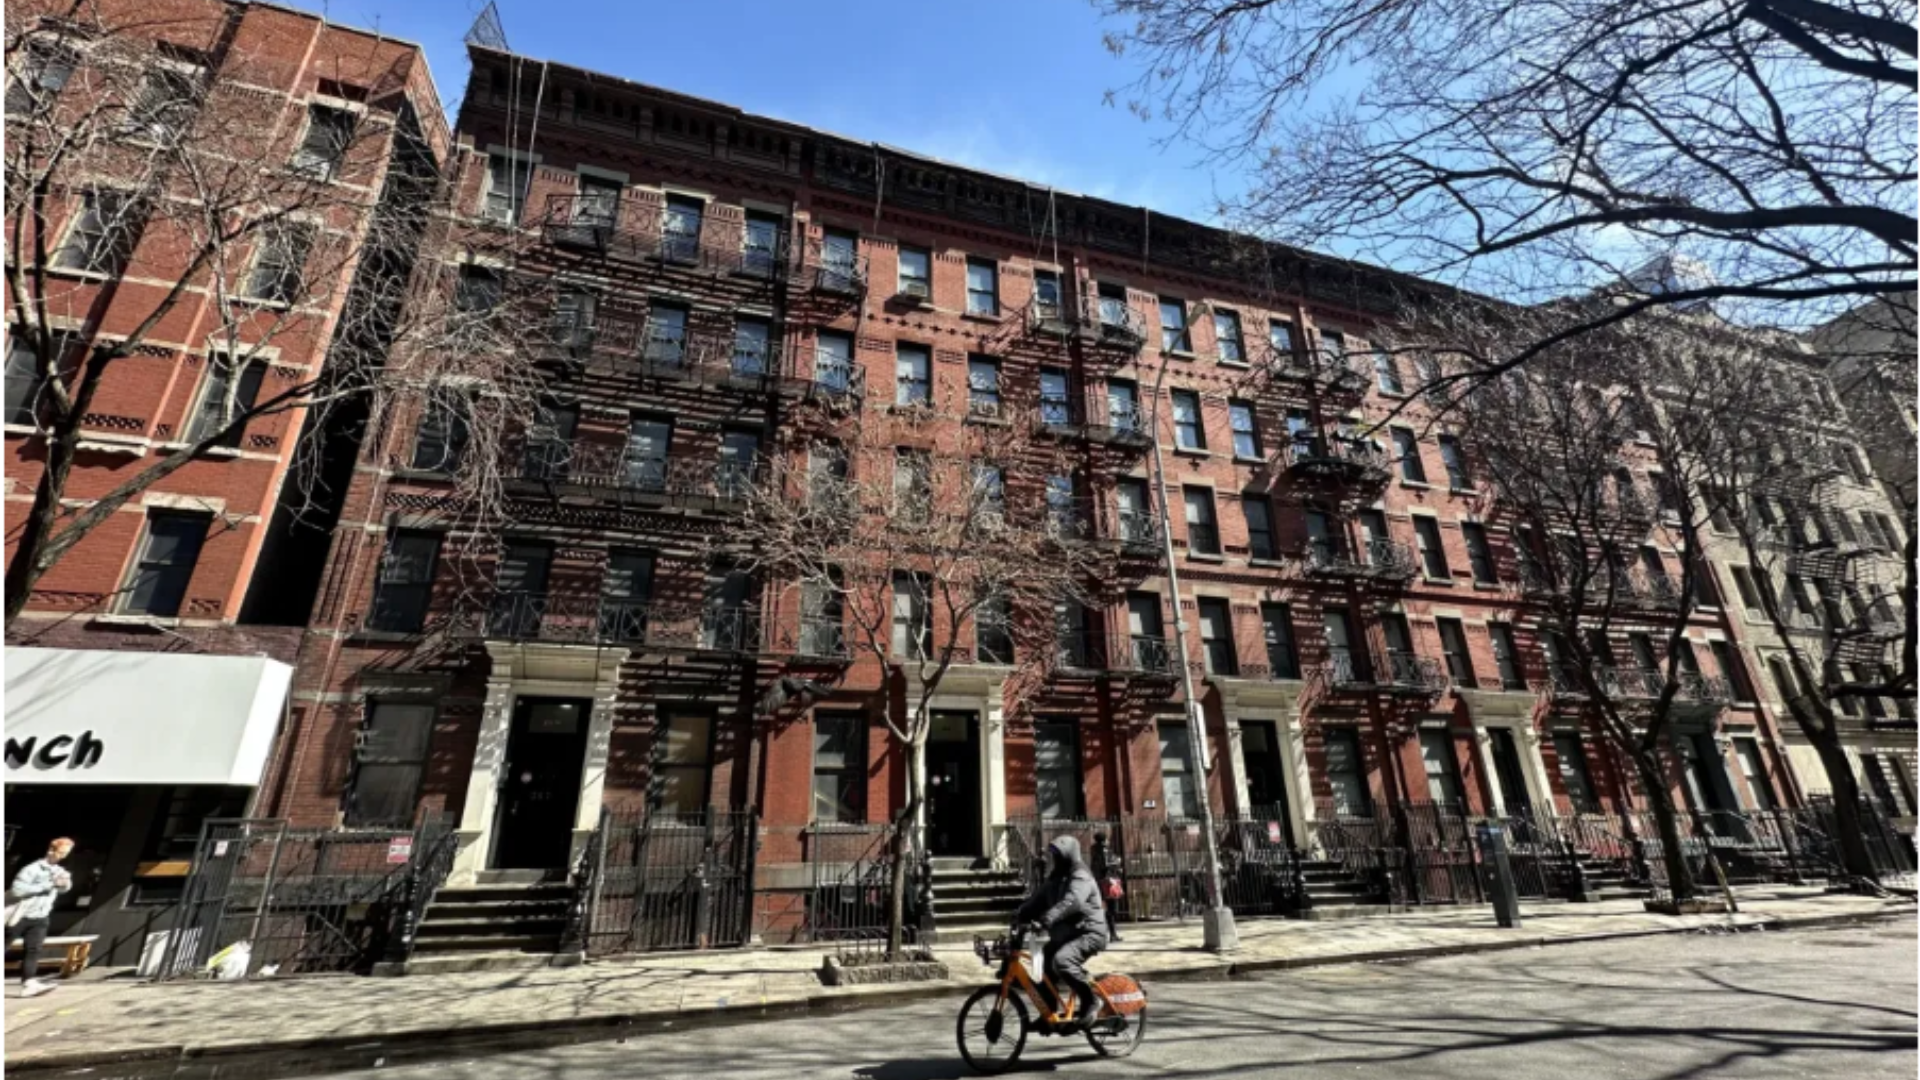 Nonprofit Aims to Transform Notorious Landlord’s Hell’s Kitchen Tenements into Housing for Homeless Families